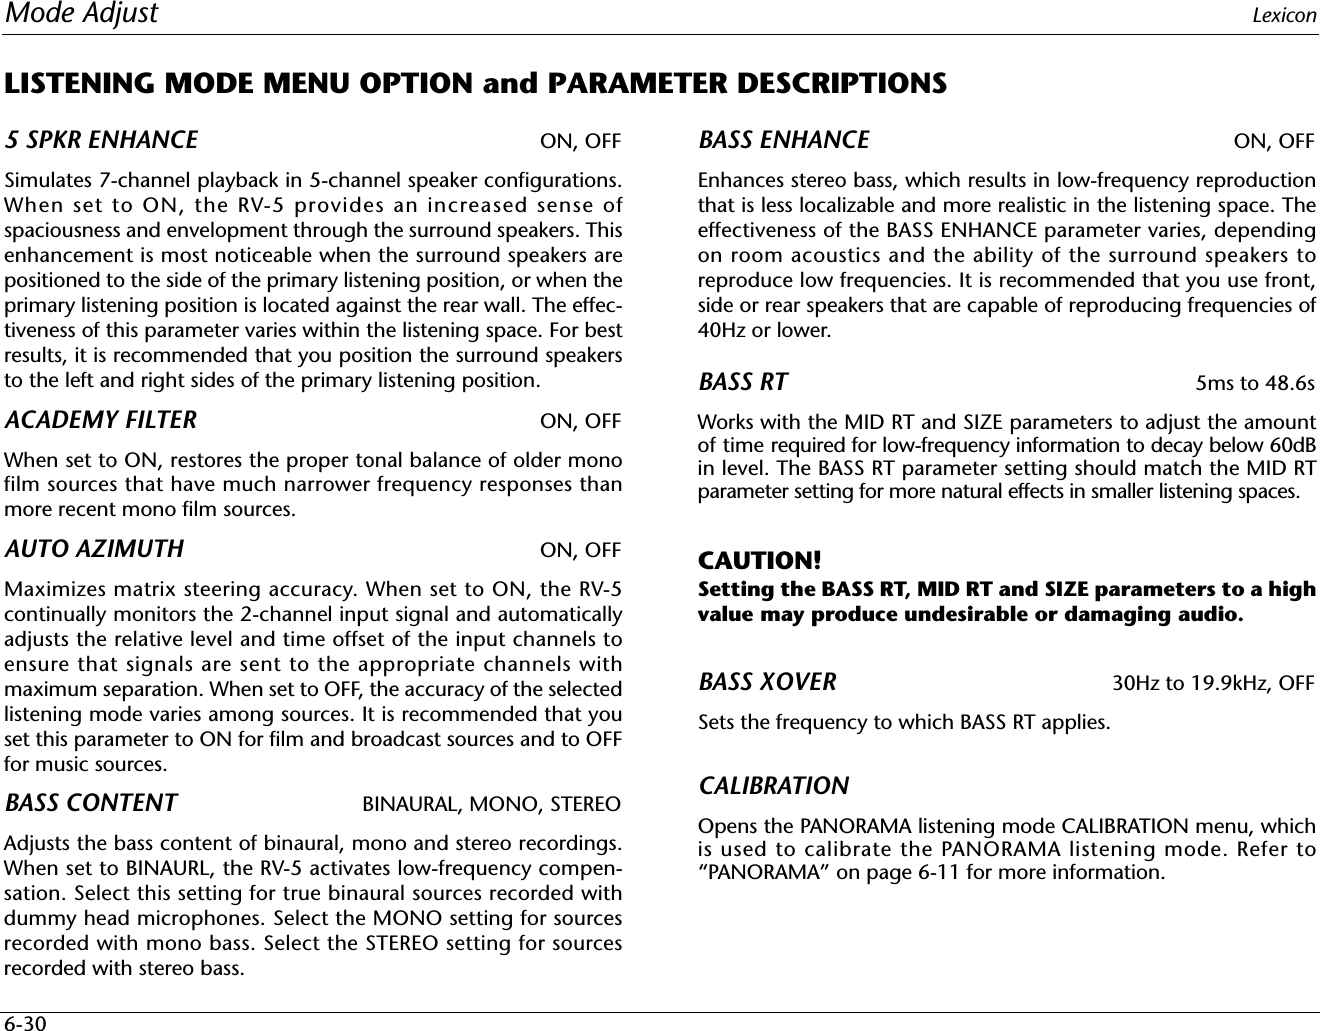 Mode Adjust Lexicon6-30LISTENING MODE MENU OPTION and PARAMETER DESCRIPTIONS5 SPKR ENHANCE ON, OFFSimulates 7-channel playback in 5-channel speaker configurations.When set to ON, the RV-5 provides an increased sense ofspaciousness and envelopment through the surround speakers. Thisenhancement is most noticeable when the surround speakers arepositioned to the side of the primary listening position, or when theprimary listening position is located against the rear wall. The effec-tiveness of this parameter varies within the listening space. For bestresults, it is recommended that you position the surround speakersto the left and right sides of the primary listening position.ACADEMY FILTER ON, OFFWhen set to ON, restores the proper tonal balance of older monofilm sources that have much narrower frequency responses thanmore recent mono film sources.AUTO AZIMUTH ON, OFFMaximizes matrix steering accuracy. When set to ON, the RV-5continually monitors the 2-channel input signal and automaticallyadjusts the relative level and time offset of the input channels toensure that signals are sent to the appropriate channels withmaximum separation. When set to OFF, the accuracy of the selectedlistening mode varies among sources. It is recommended that youset this parameter to ON for film and broadcast sources and to OFFfor music sources.BASS CONTENT BINAURAL, MONO, STEREOAdjusts the bass content of binaural, mono and stereo recordings.When set to BINAURL, the RV-5 activates low-frequency compen-sation. Select this setting for true binaural sources recorded withdummy head microphones. Select the MONO setting for sourcesrecorded with mono bass. Select the STEREO setting for sourcesrecorded with stereo bass.BASS ENHANCE ON, OFFEnhances stereo bass, which results in low-frequency reproductionthat is less localizable and more realistic in the listening space. Theeffectiveness of the BASS ENHANCE parameter varies, dependingon room acoustics and the ability of the surround speakers toreproduce low frequencies. It is recommended that you use front,side or rear speakers that are capable of reproducing frequencies of40Hz or lower.BASS RT 5ms to 48.6sWorks with the MID RT and SIZE parameters to adjust the amountof time required for low-frequency information to decay below 60dBin level. The BASS RT parameter setting should match the MID RTparameter setting for more natural effects in smaller listening spaces.CAUTION!Setting the BASS RT, MID RT and SIZE parameters to a highvalue may produce undesirable or damaging audio.BASS XOVER 30Hz to 19.9kHz, OFFSets the frequency to which BASS RT applies.CALIBRATIONOpens the PANORAMA listening mode CALIBRATION menu, whichis used to calibrate the PANORAMA listening mode. Refer to“PANORAMA” on page 6-11 for more information.